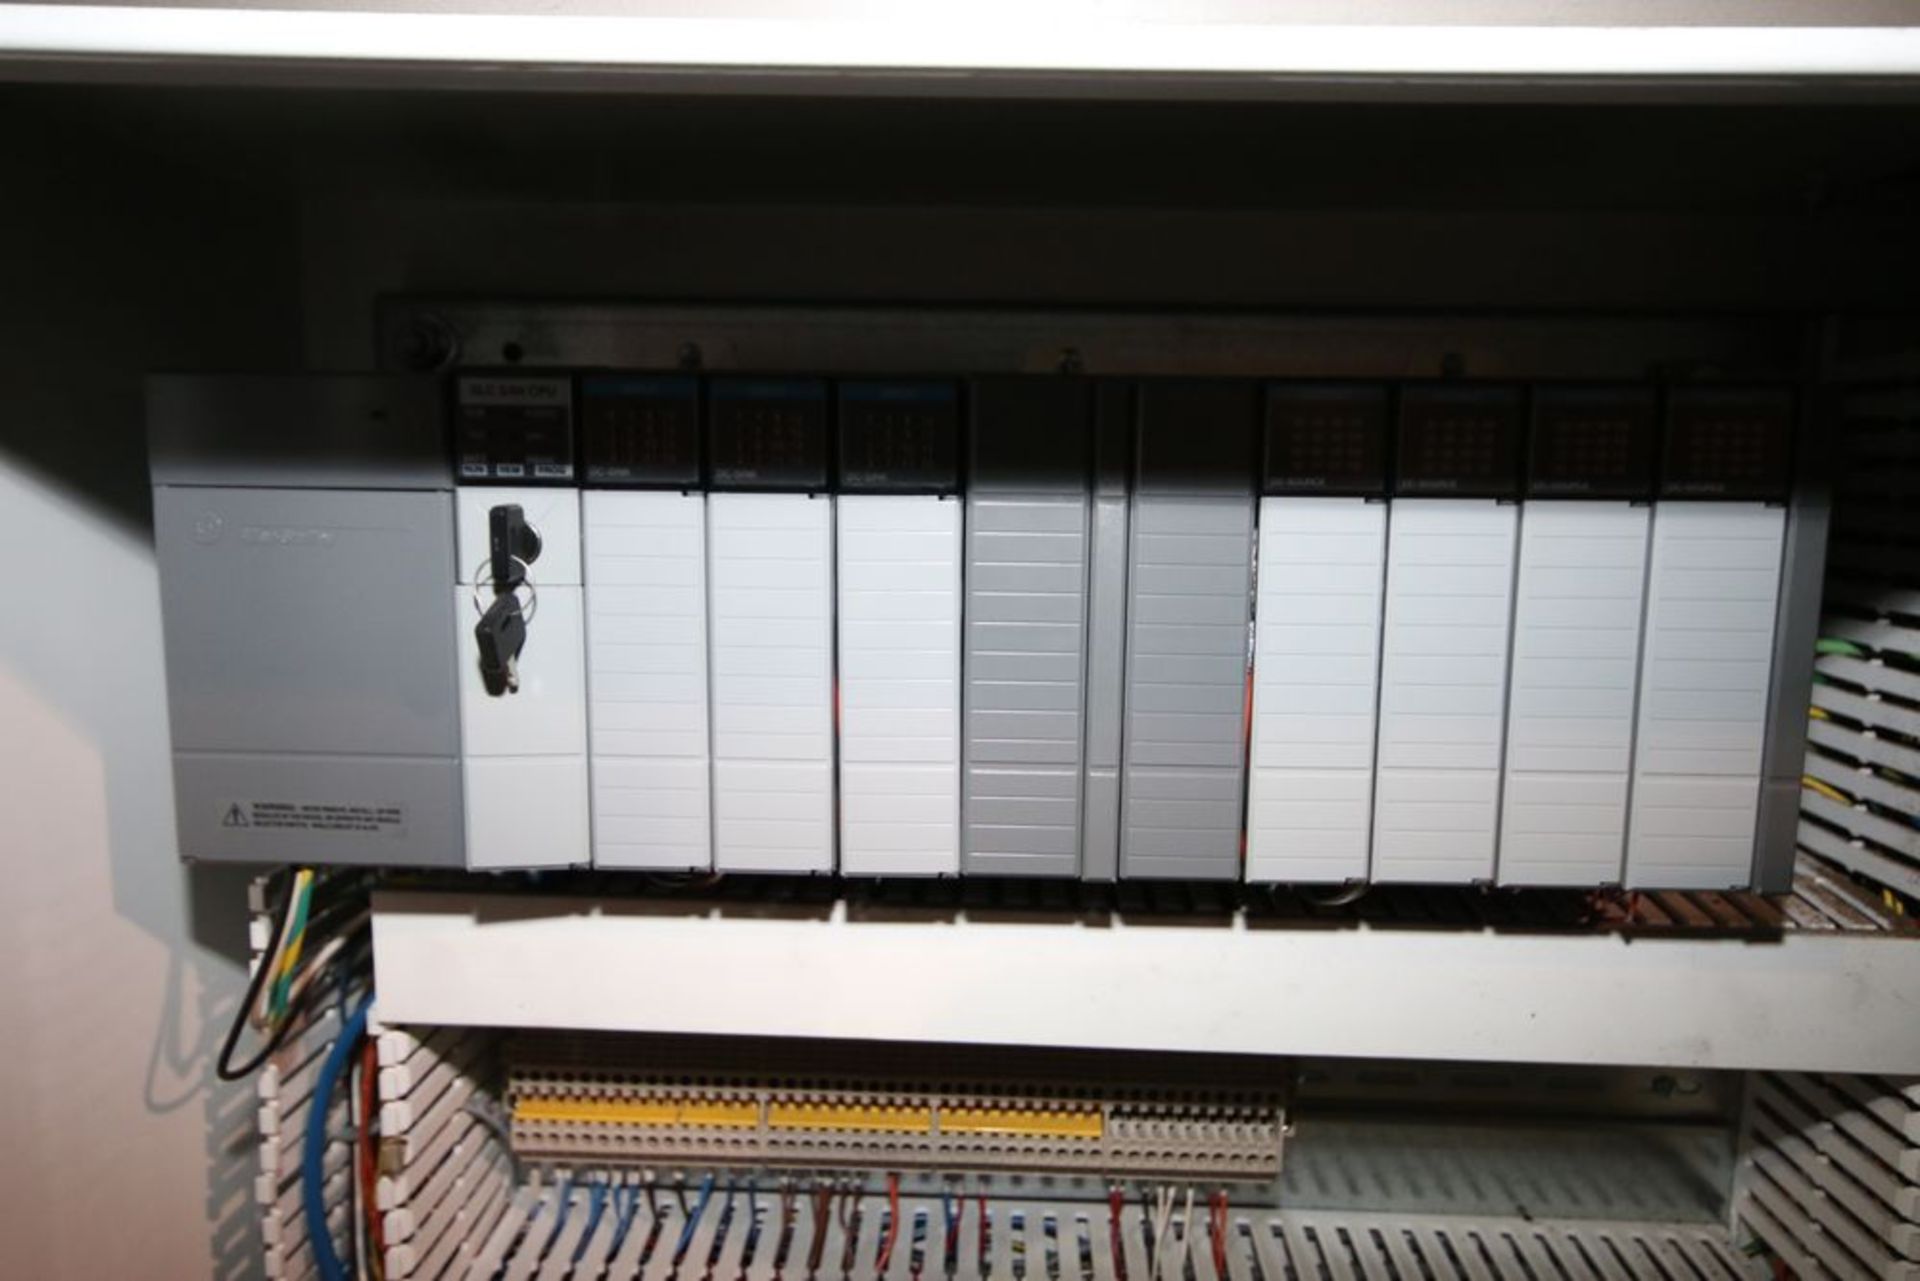 Arthur G. Russel Co. Dual Yogurt Capping Machine, with Allen Bradley 8-Slot PLC, with SLC 5/04 CPU - Image 8 of 13